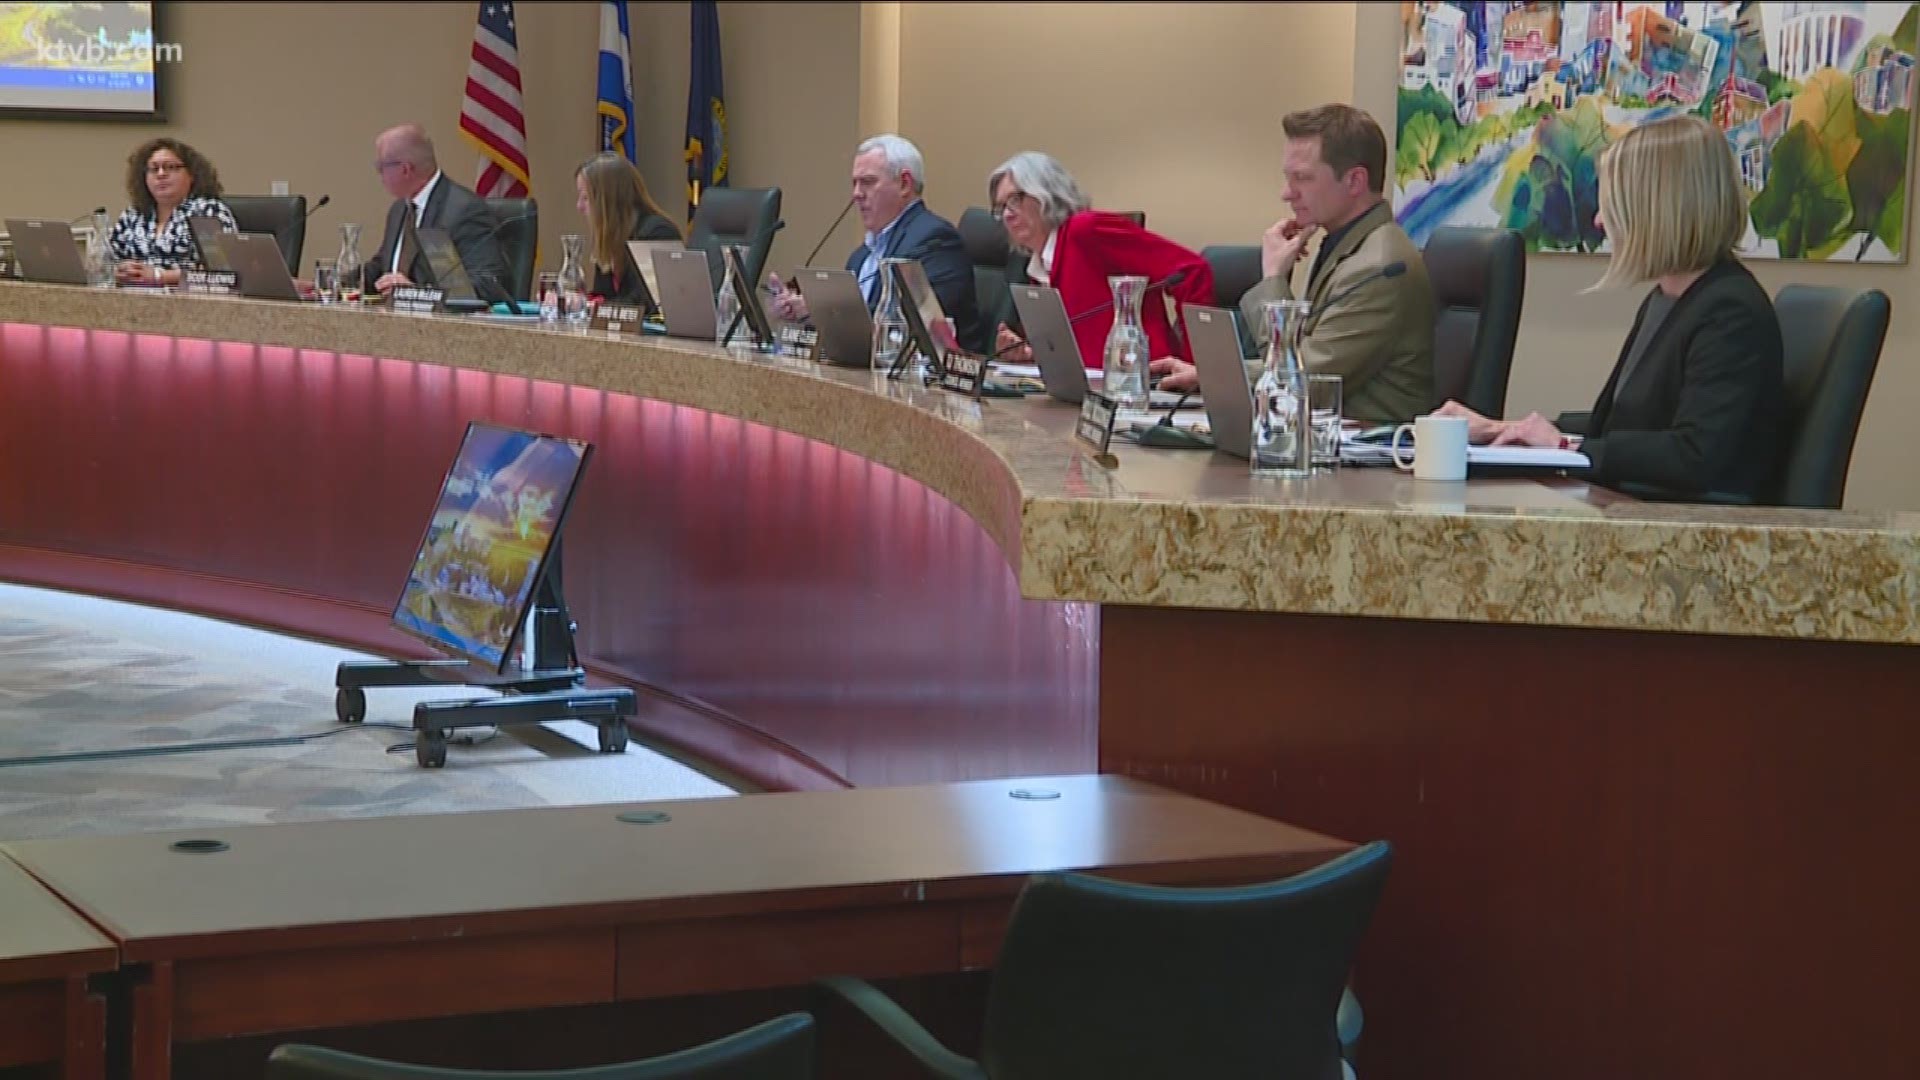 While talk of public transportation dominated Tuesday's meeting, the City Council also voted on a land-swap deal, their clean energy plan, and had a public hearing on a proposed ban on vaping in public spaces.